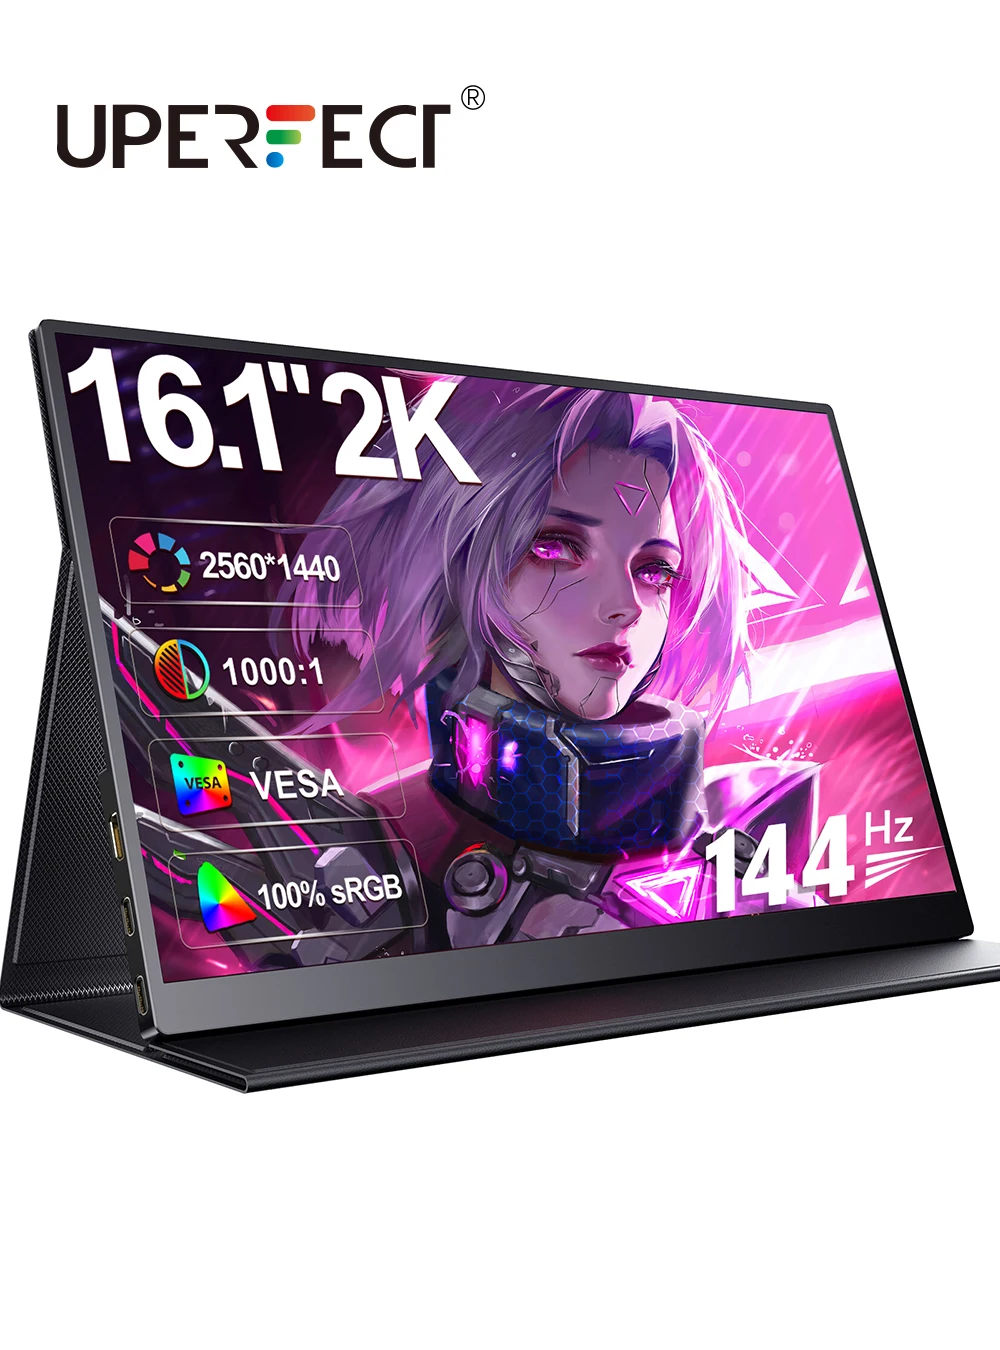 

UPERFECT 16.1 Inch 2K 144Hz Portable Monitor USB-C HDMI with 2560 x 1440 IPS Computer Display HDR FreeSync Laptop Screen for PC